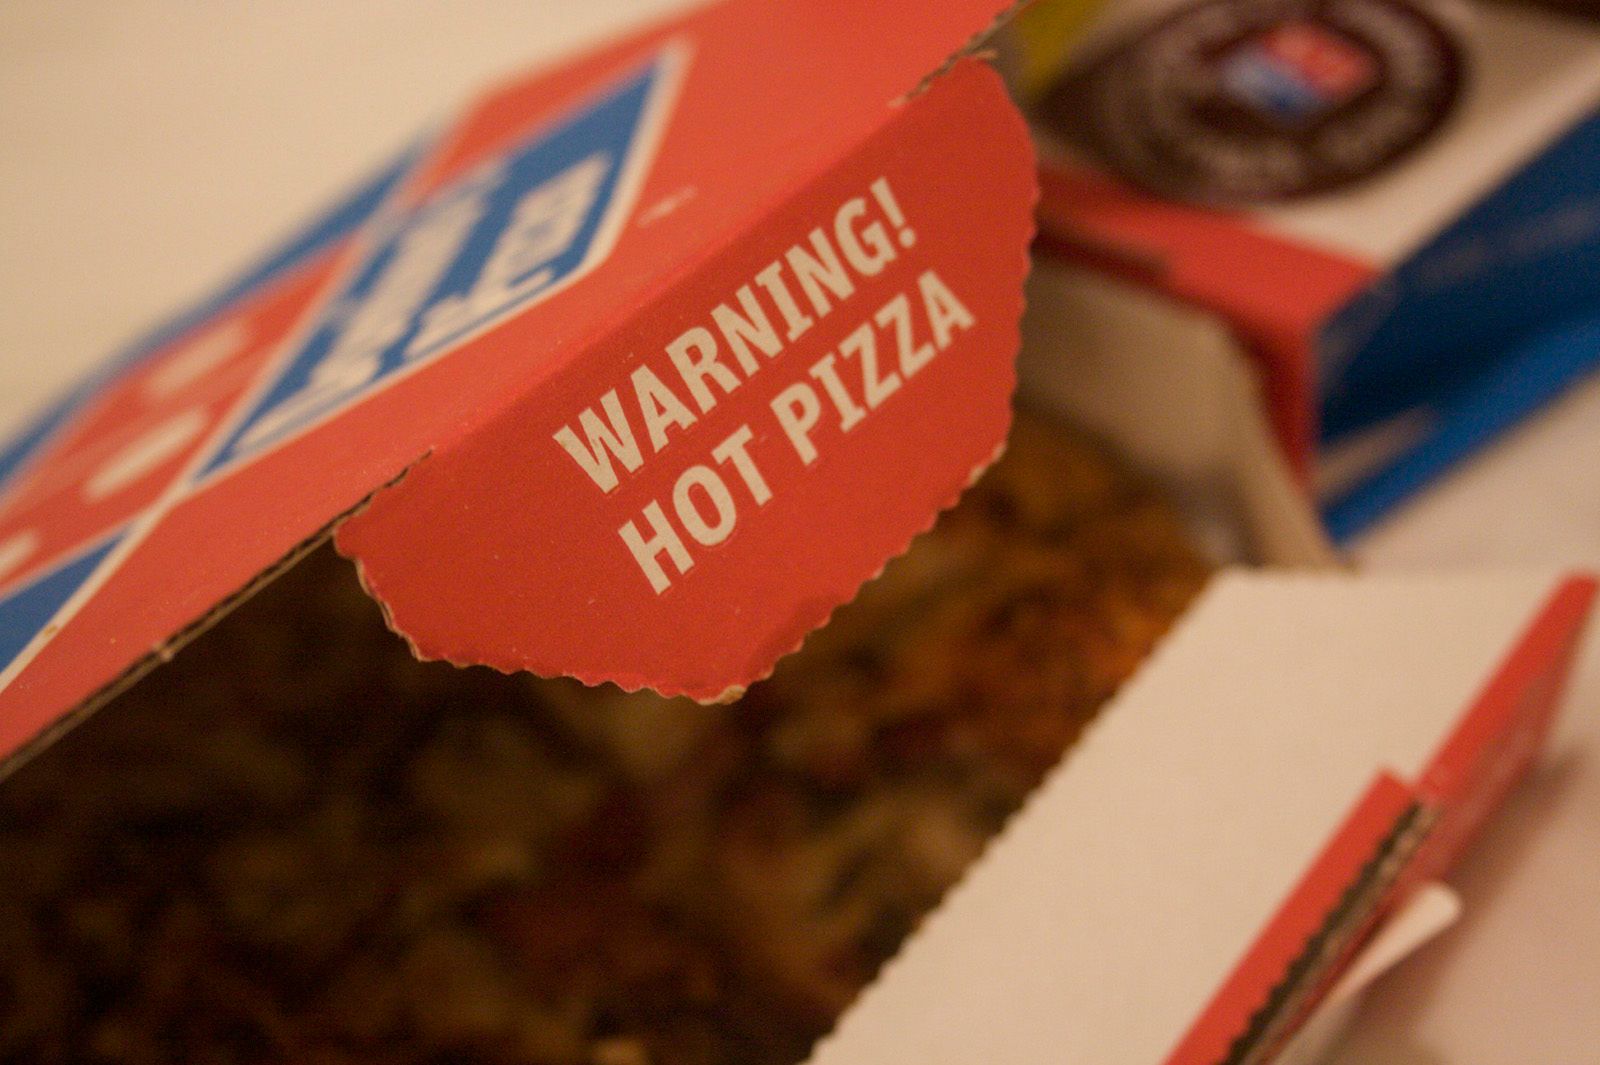 xbox one owners will soon be able to order pizza without leaving the couch image 1